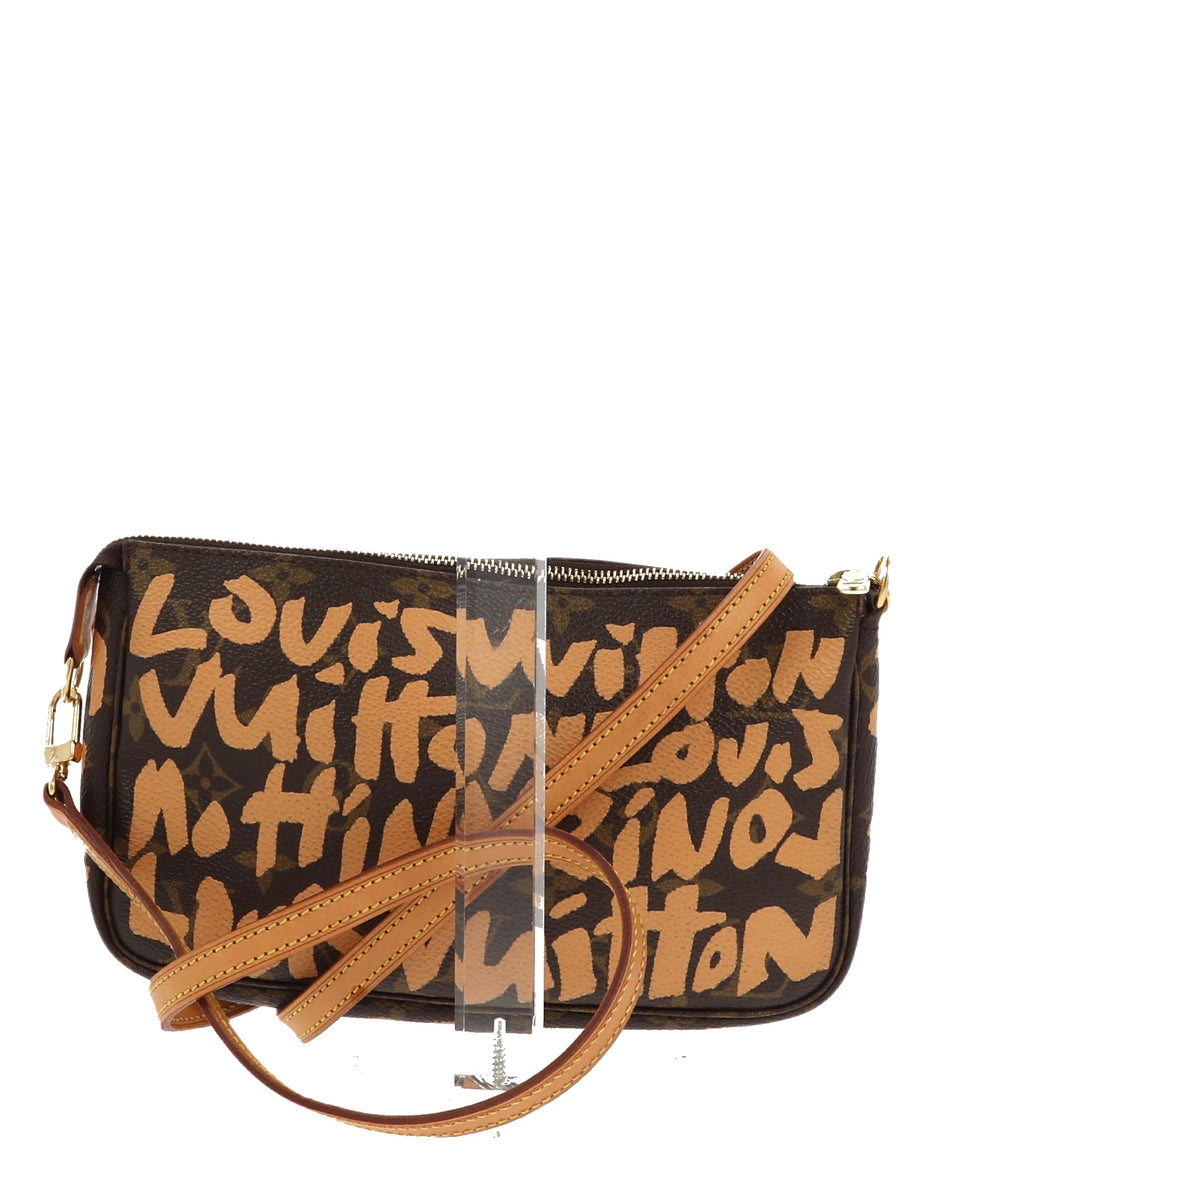 Limited Edition Louis Vuitton x Stephen Sprouse Graffiti Wallet in bro –  Fancy Lux